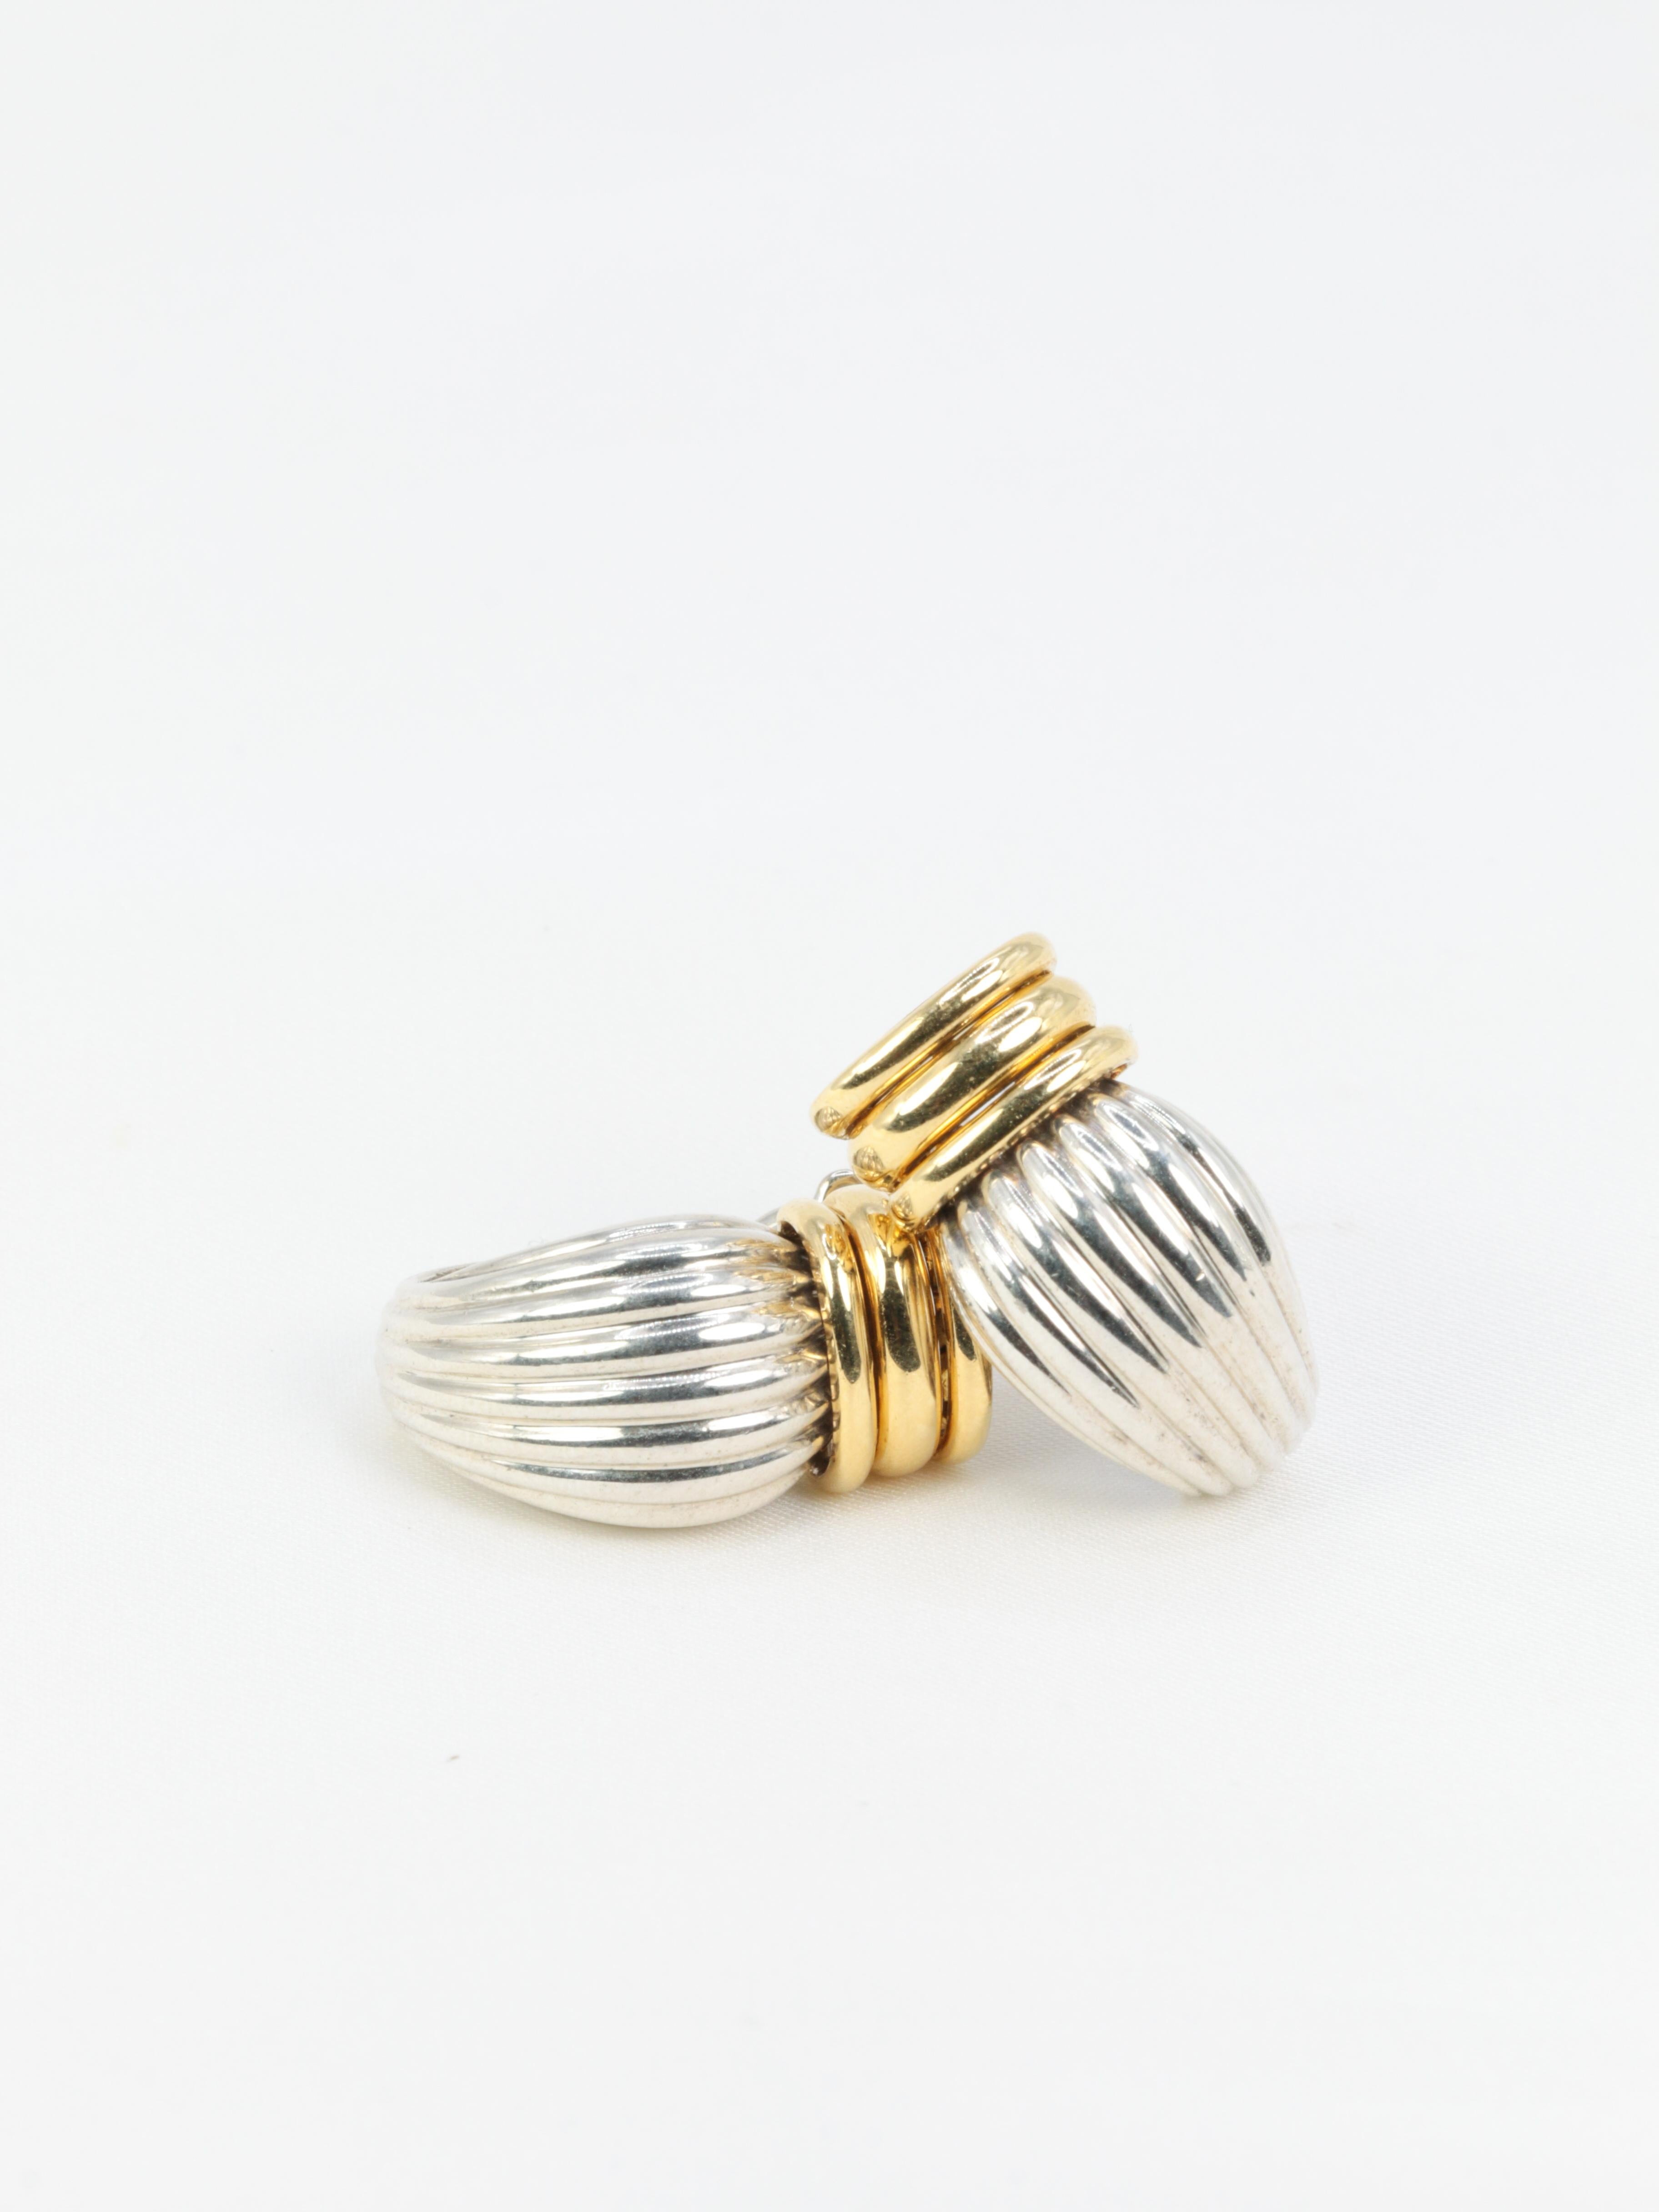 Oj Perrin Gold and Silver Earrings For Sale 4